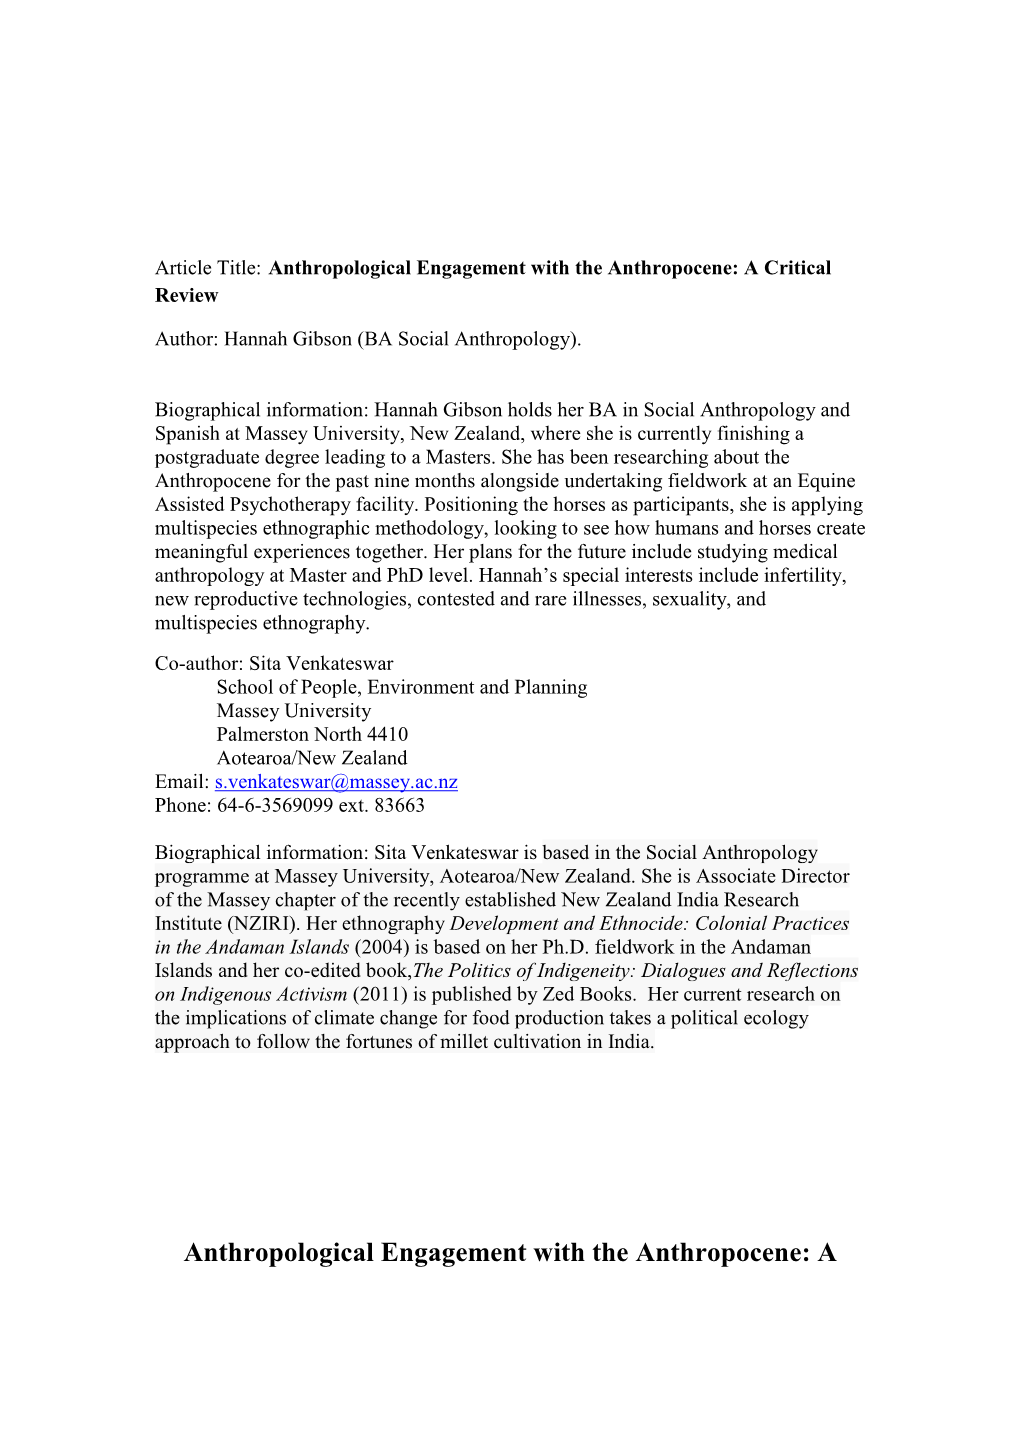 Anthropological Engagement with the Anthropocene: a Critical Review